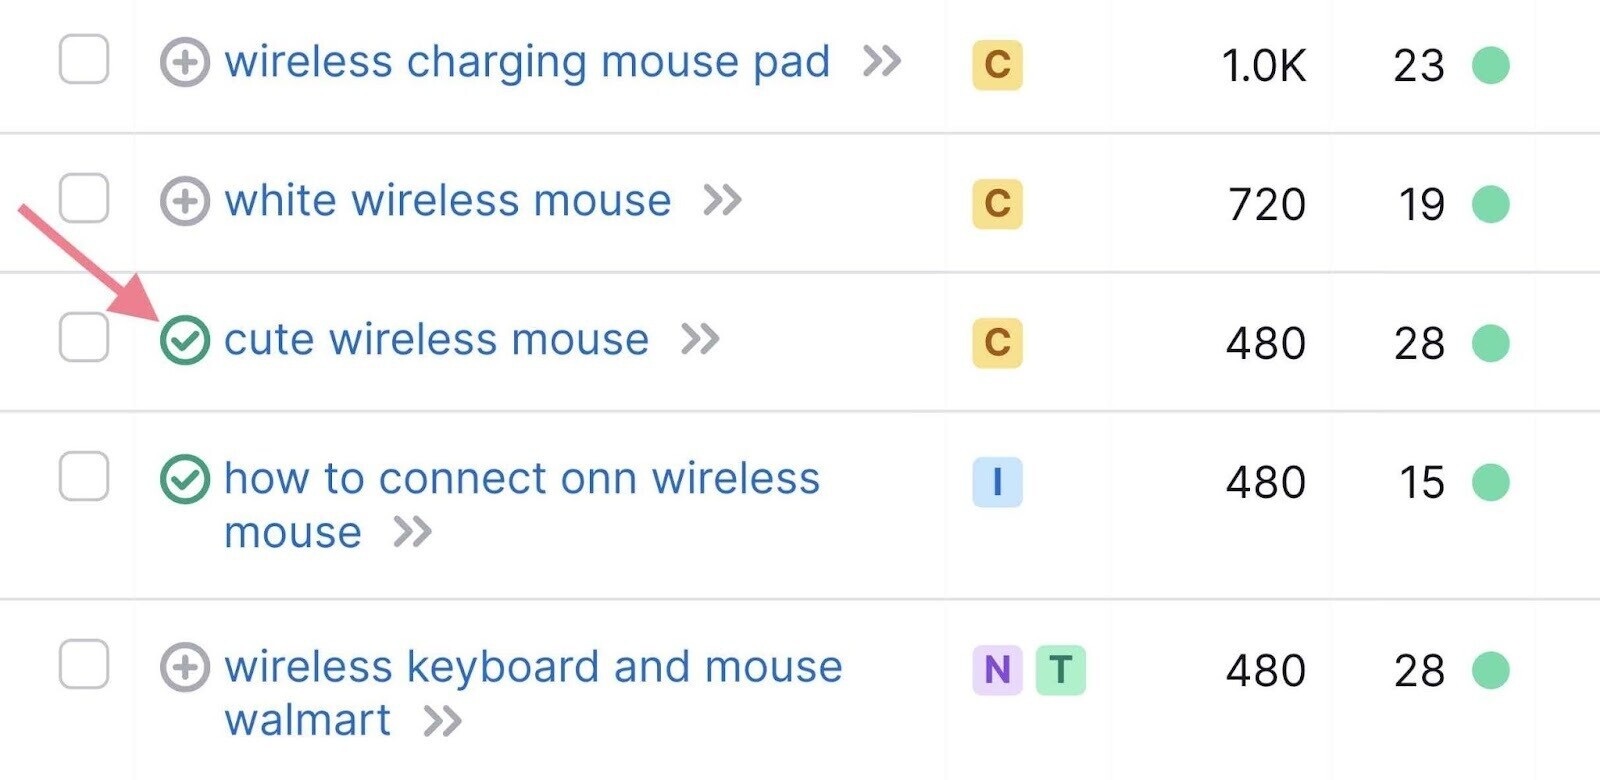 cute wireless mouse keyword added to the list